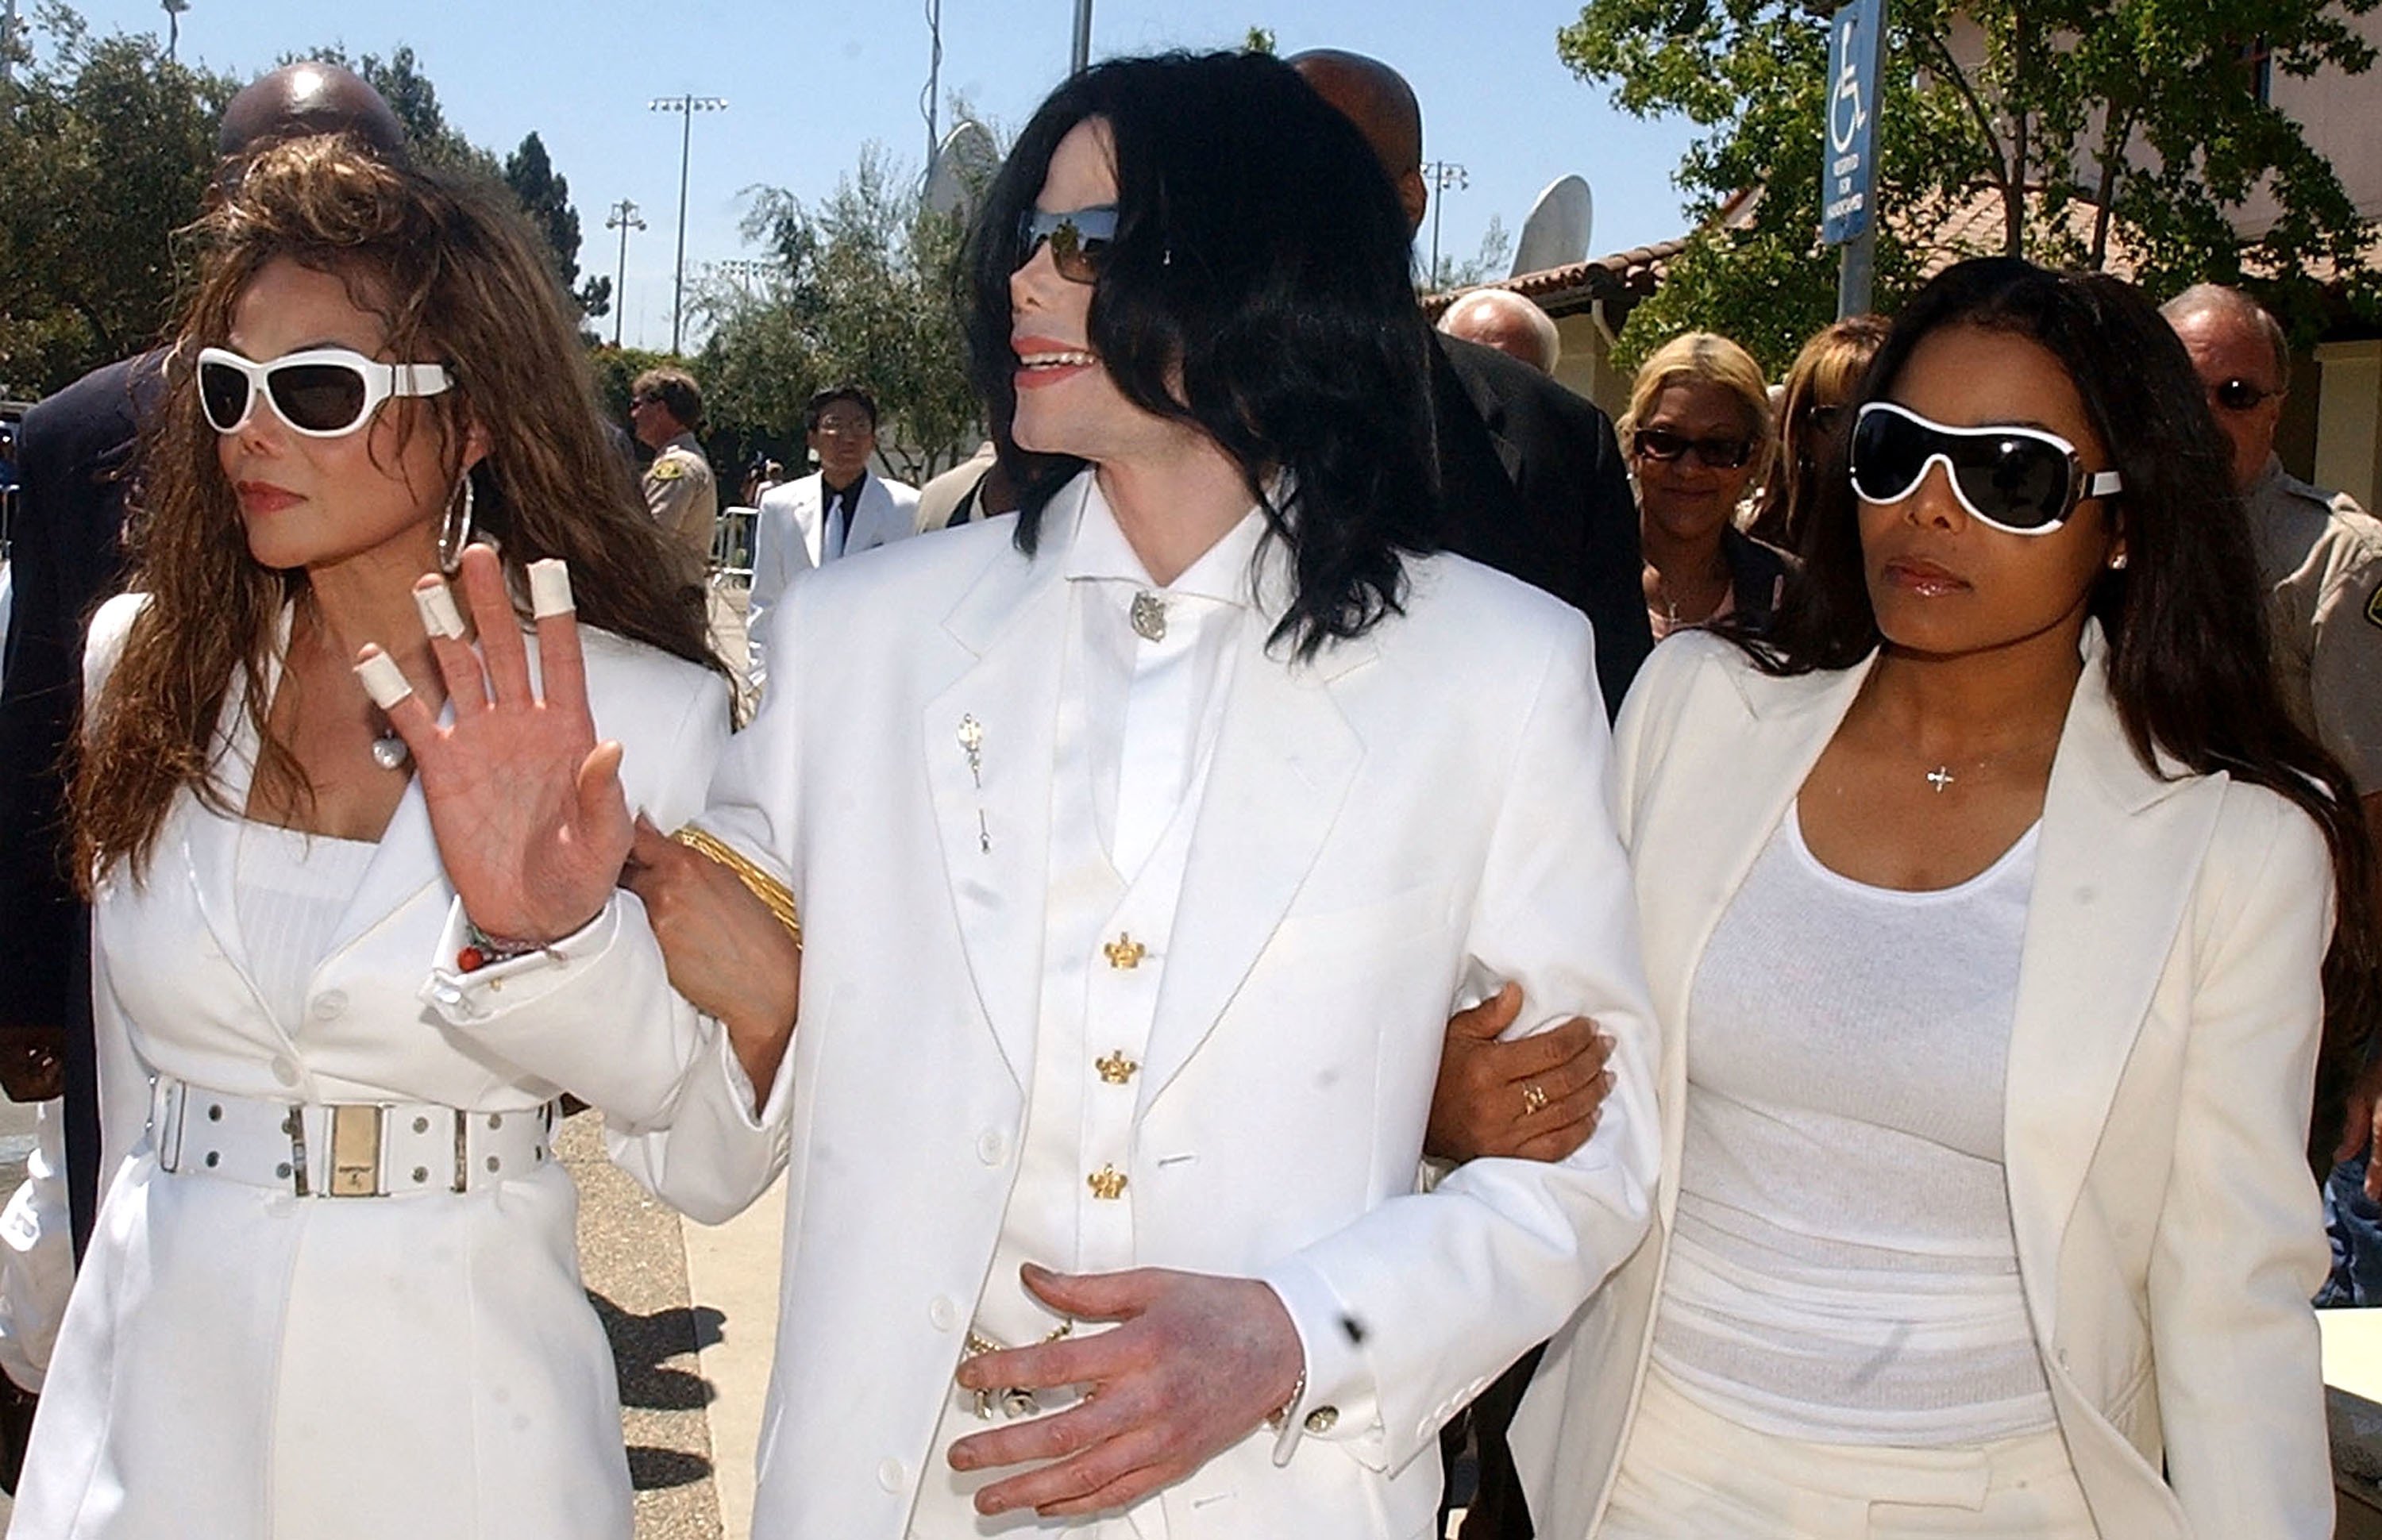 Michael, LaToya and Janet Jackson at the Santa Maria courthouse during the evidentiary hearing in the 2004 child molestation case | Source: Getty Images